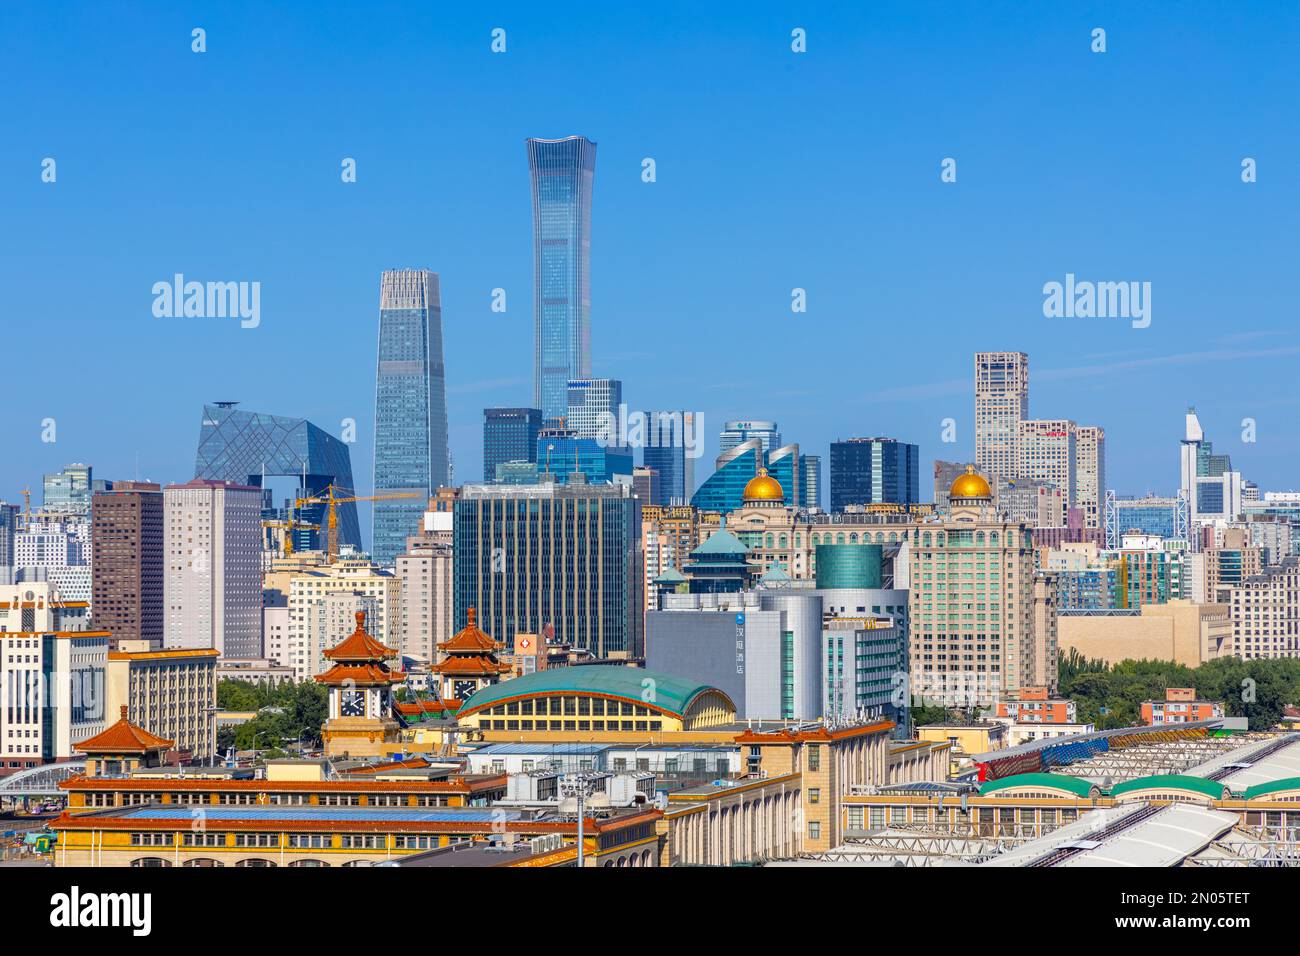 Beijing railway station with guomao CBD central business district (CBD) in China Stock Photo